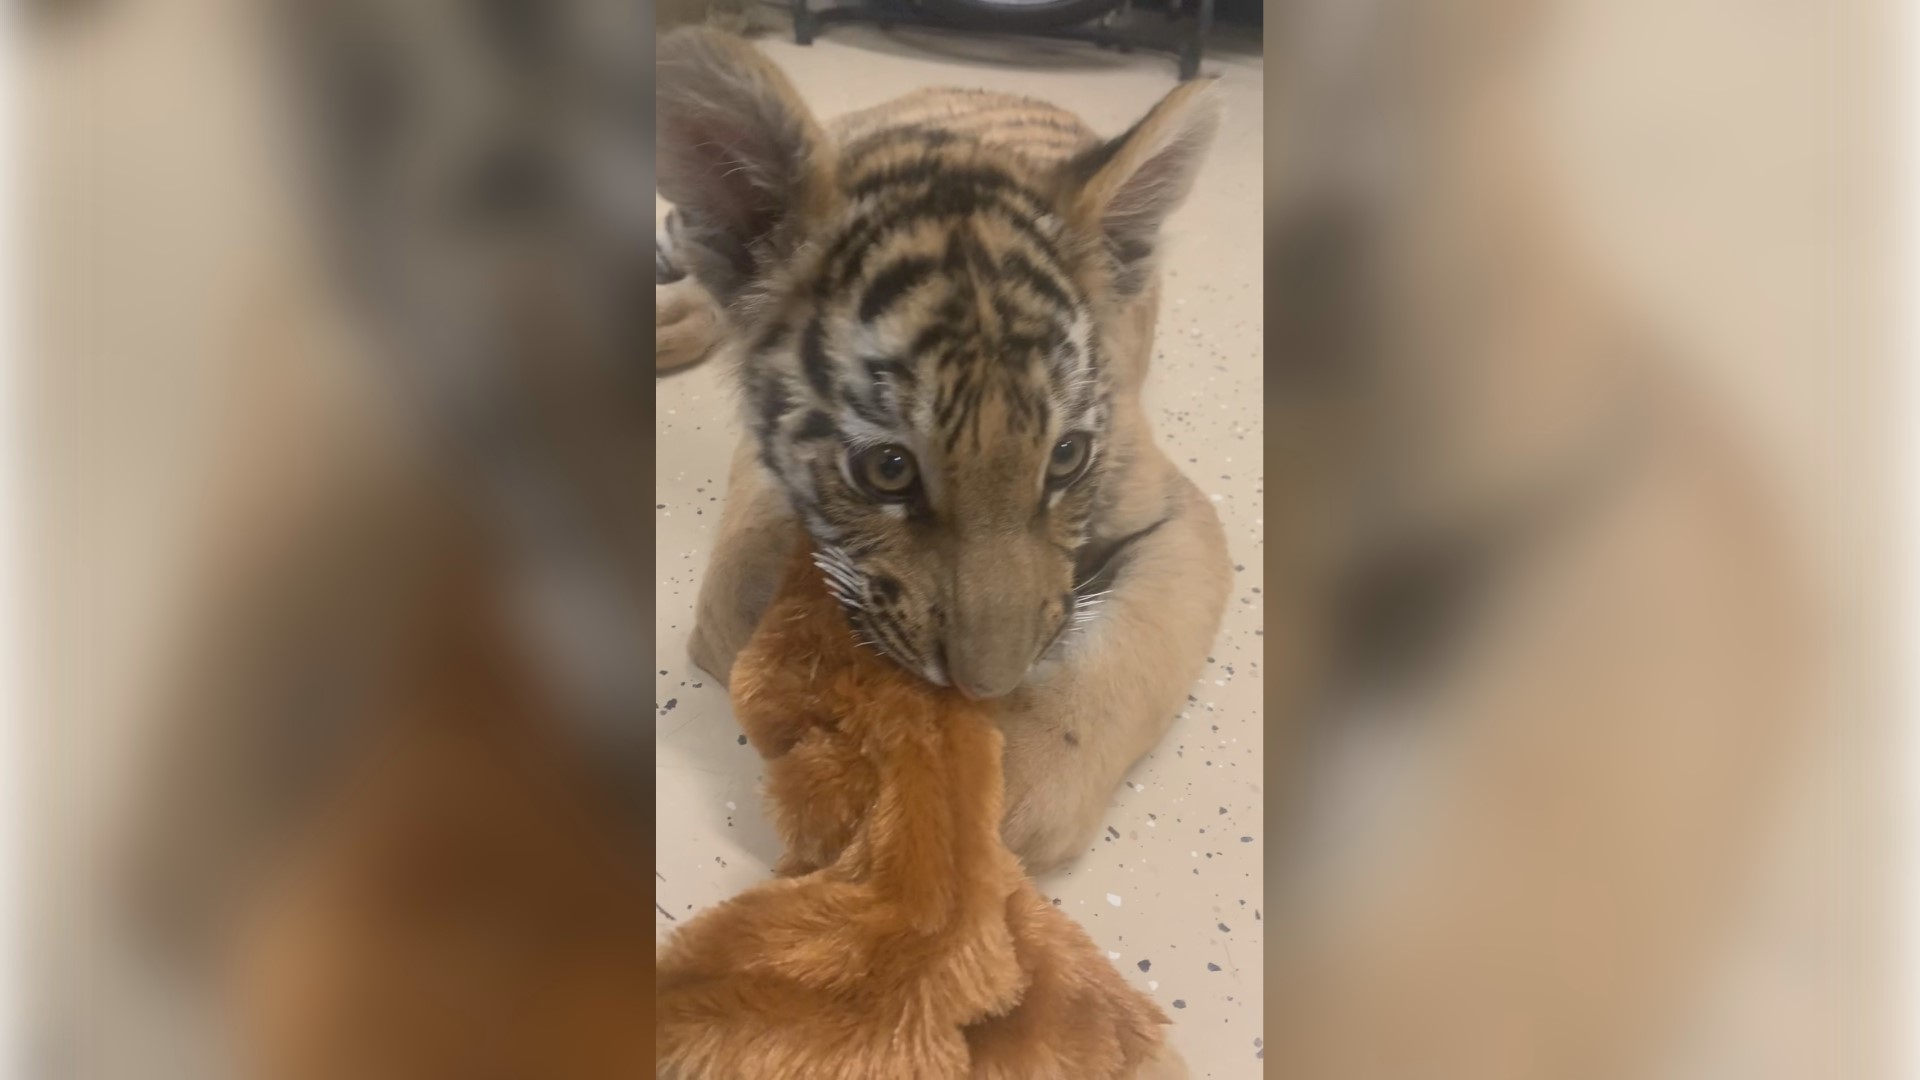 Southwest Wildlife Conservation Center officials said the cub now lives in a special enclosure in Scottsdale, where she is getting the care she needs.